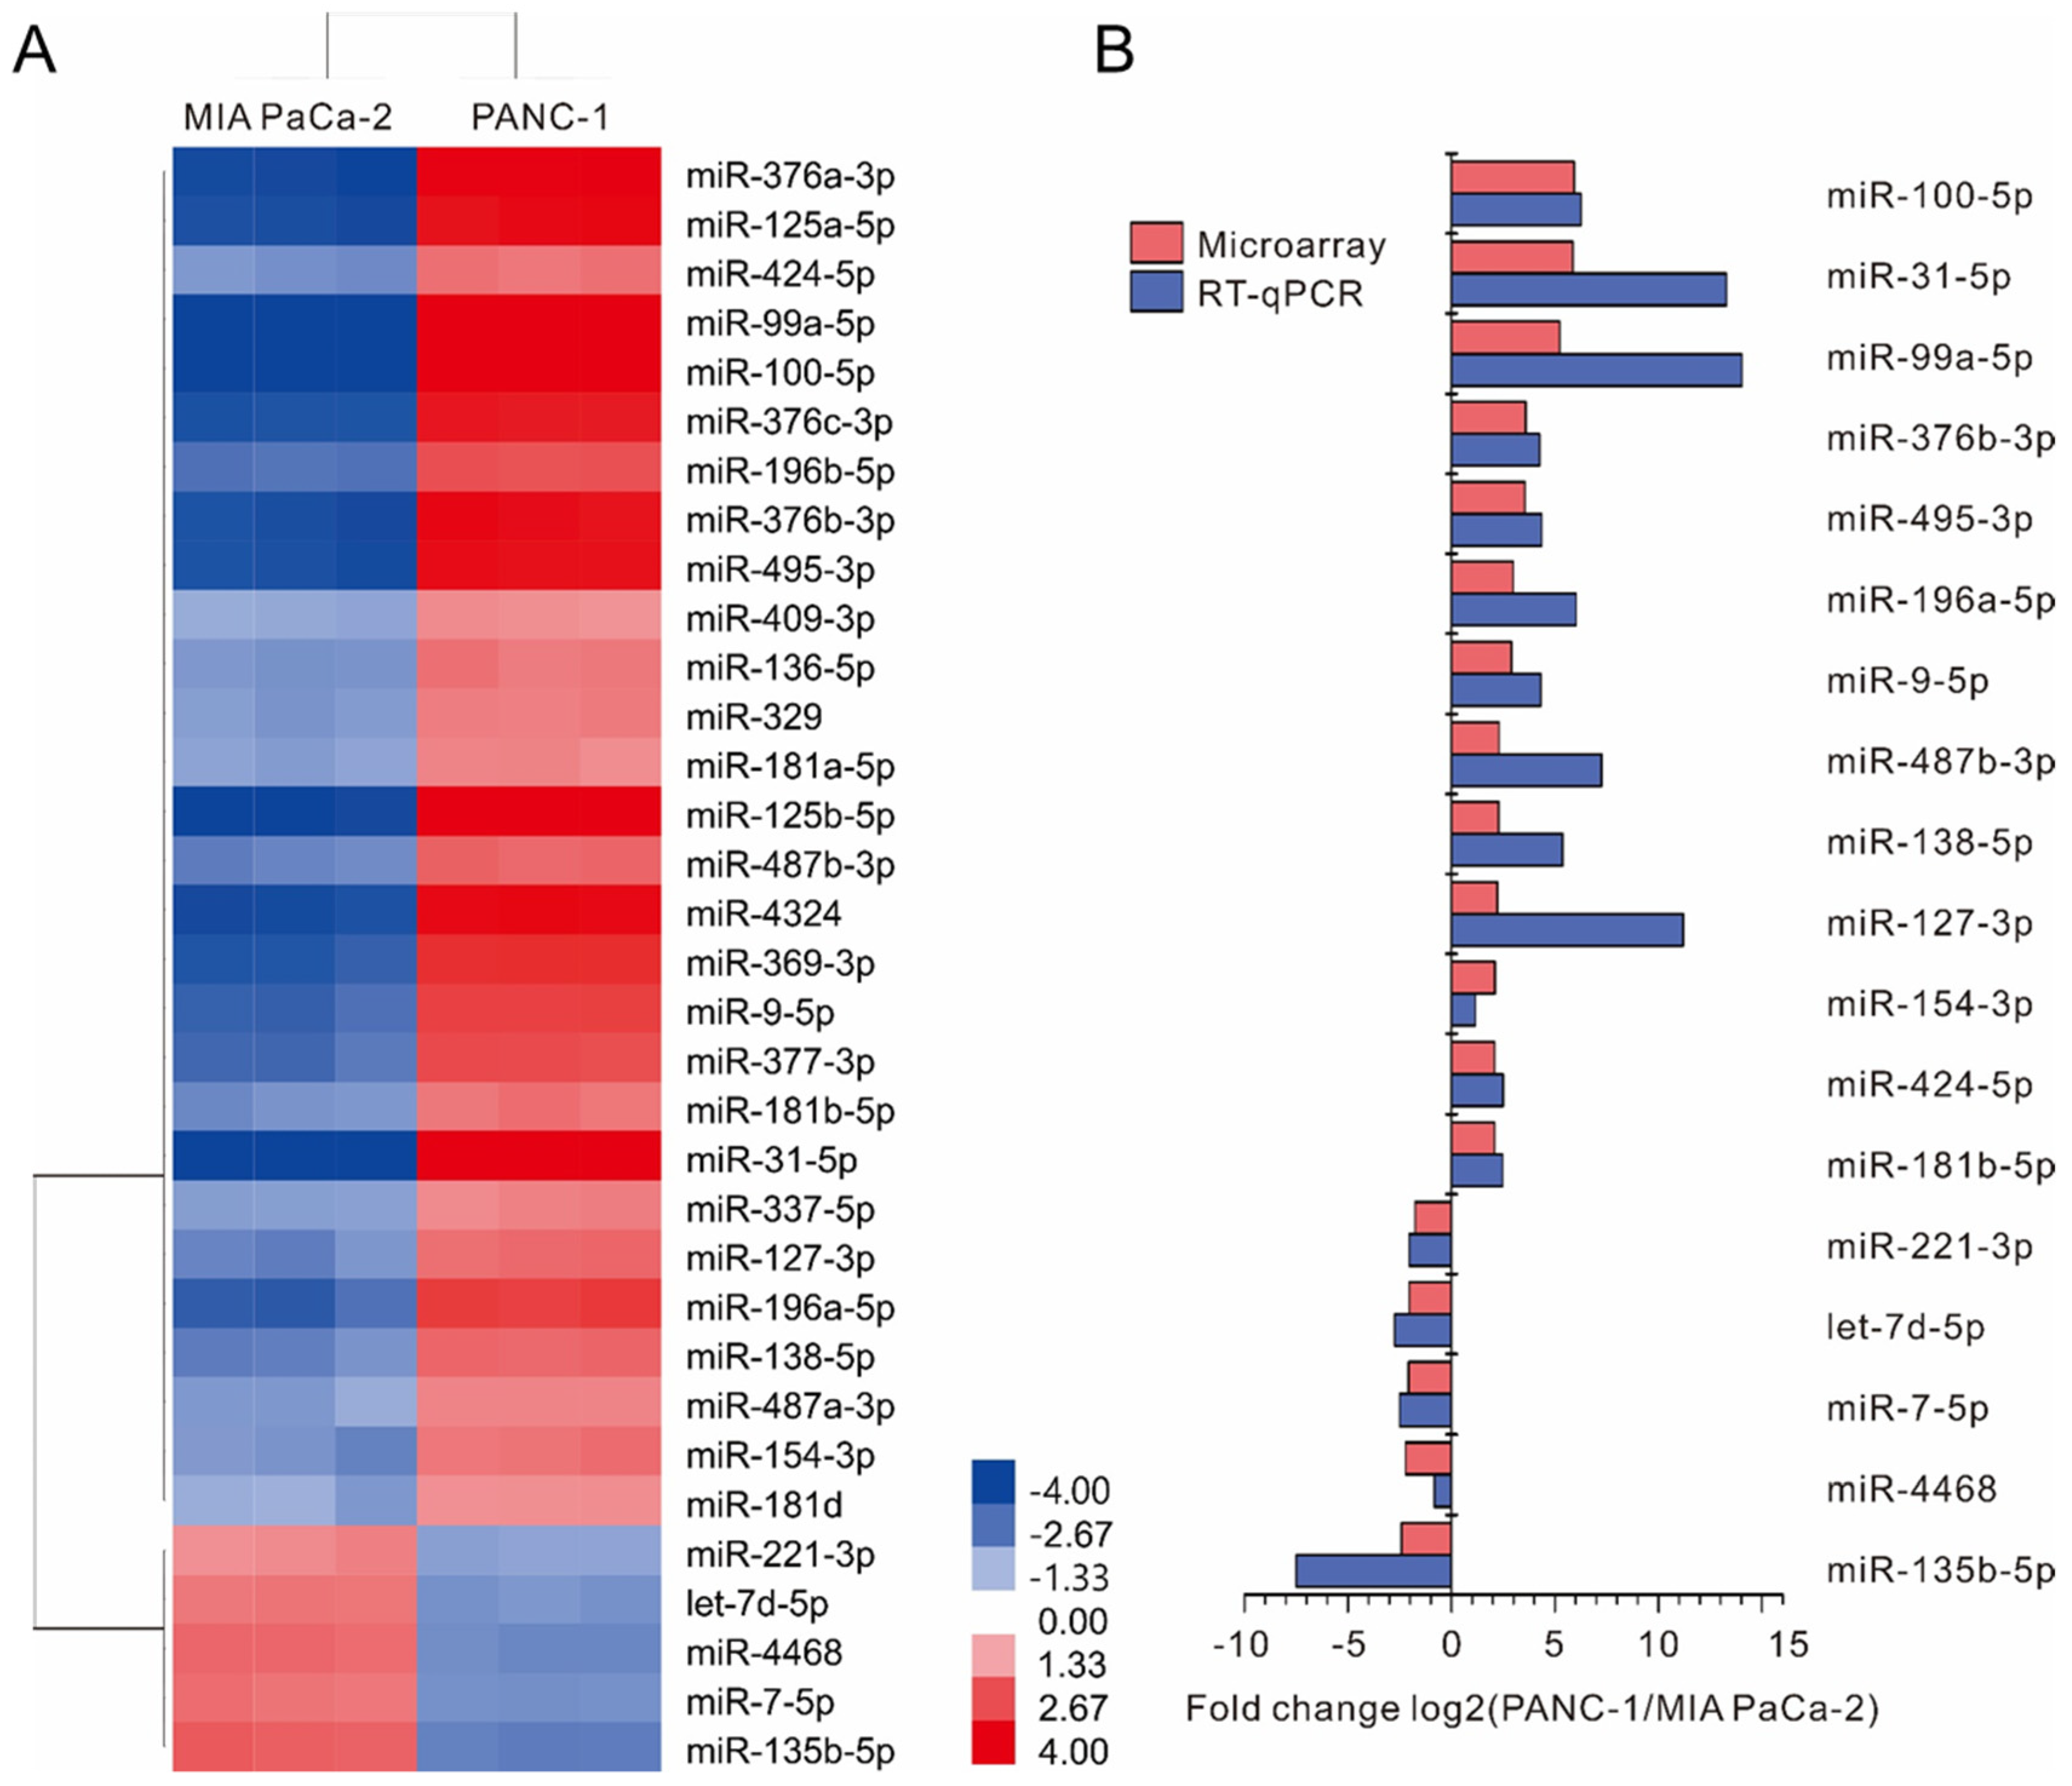 Ijms Free Full Text Differentially Expressed Micrornas In Mia Paca 2 And Panc 1 Pancreas Ductal Adenocarcinoma Cell Lines Are Involved In Cancer Stem Cell Regulation Html